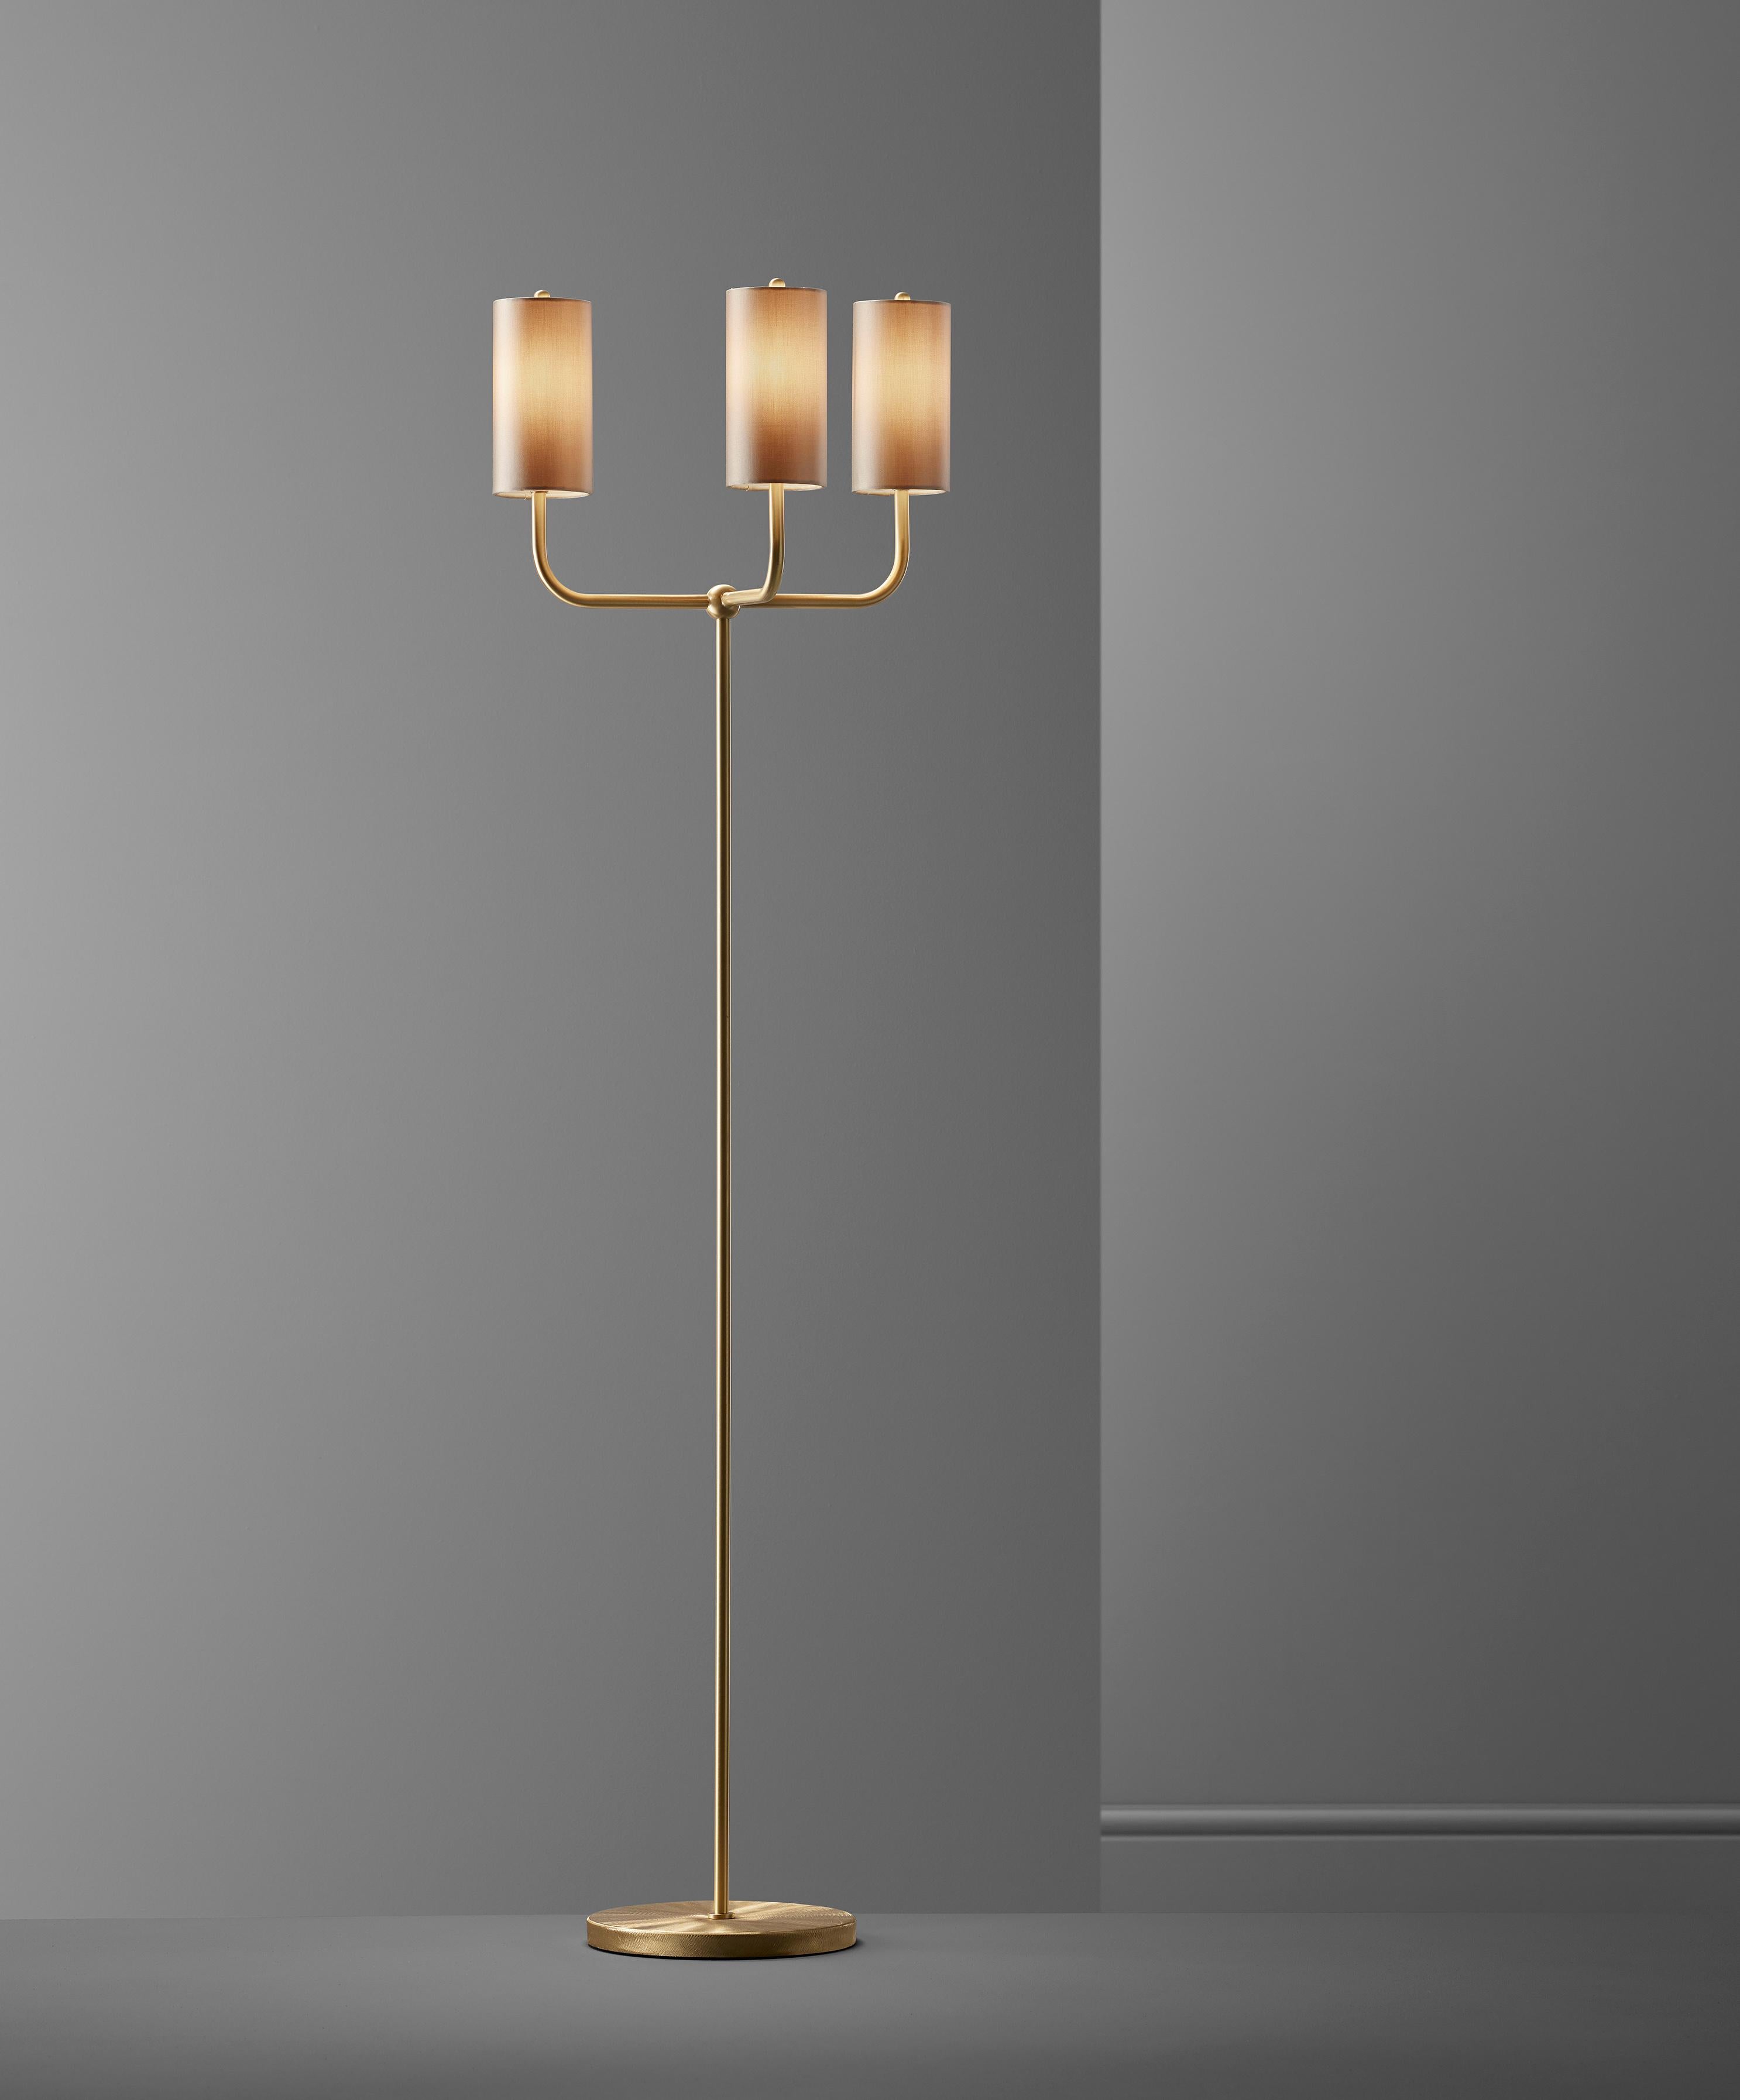 This floor lamp is a modern take on tradition. Beautifully crafted with elegant materials including brushed brass and sateen shades. The tall, timeless shades add a modern touch to the classic motif base, giving a familiar, yet forward looking